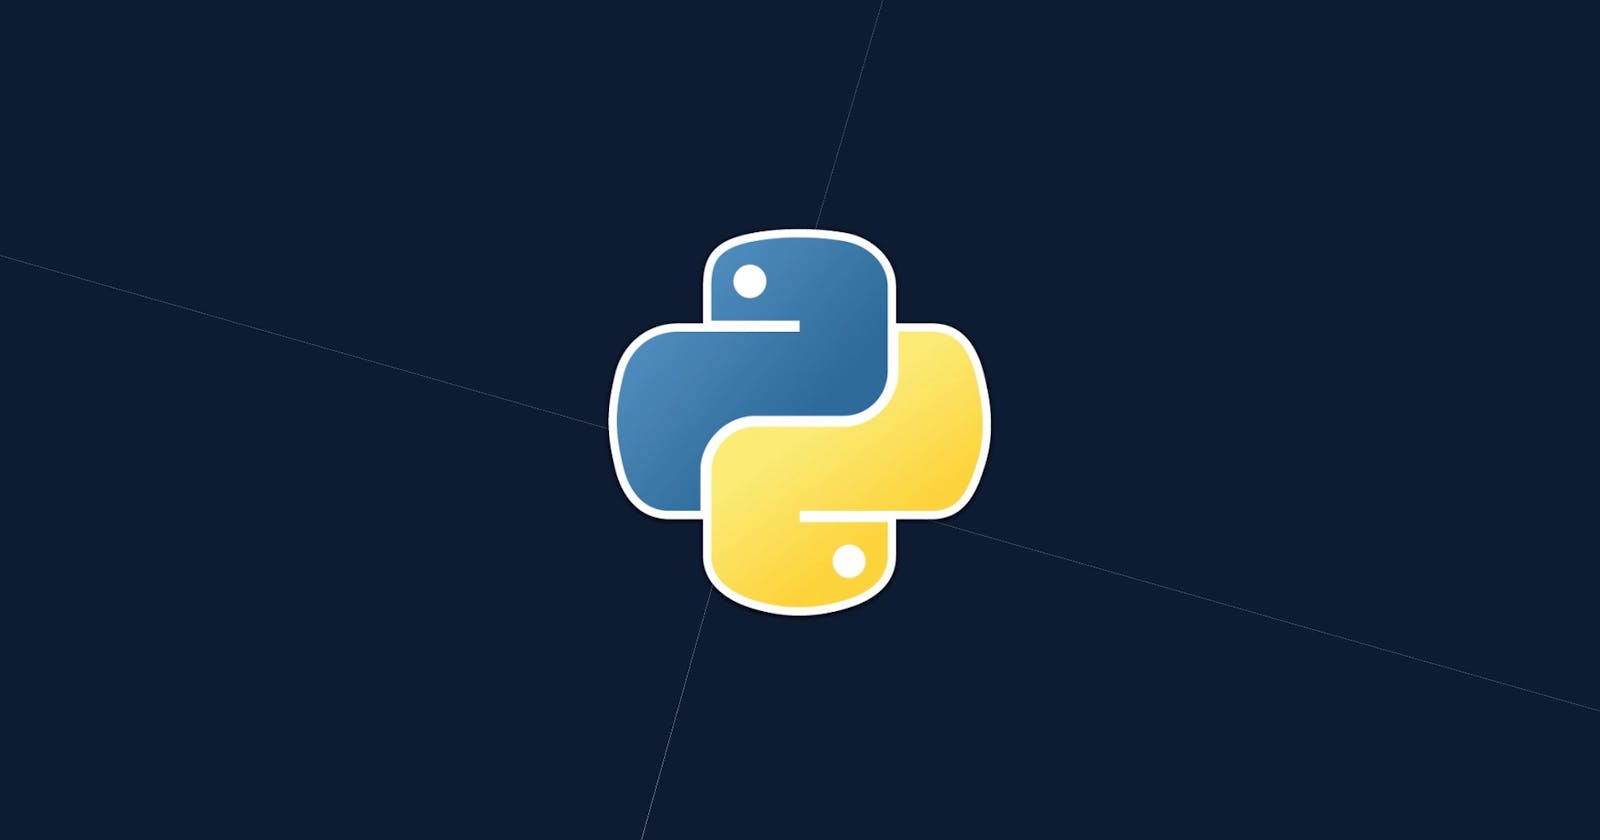 Working with JSON Files Using Python